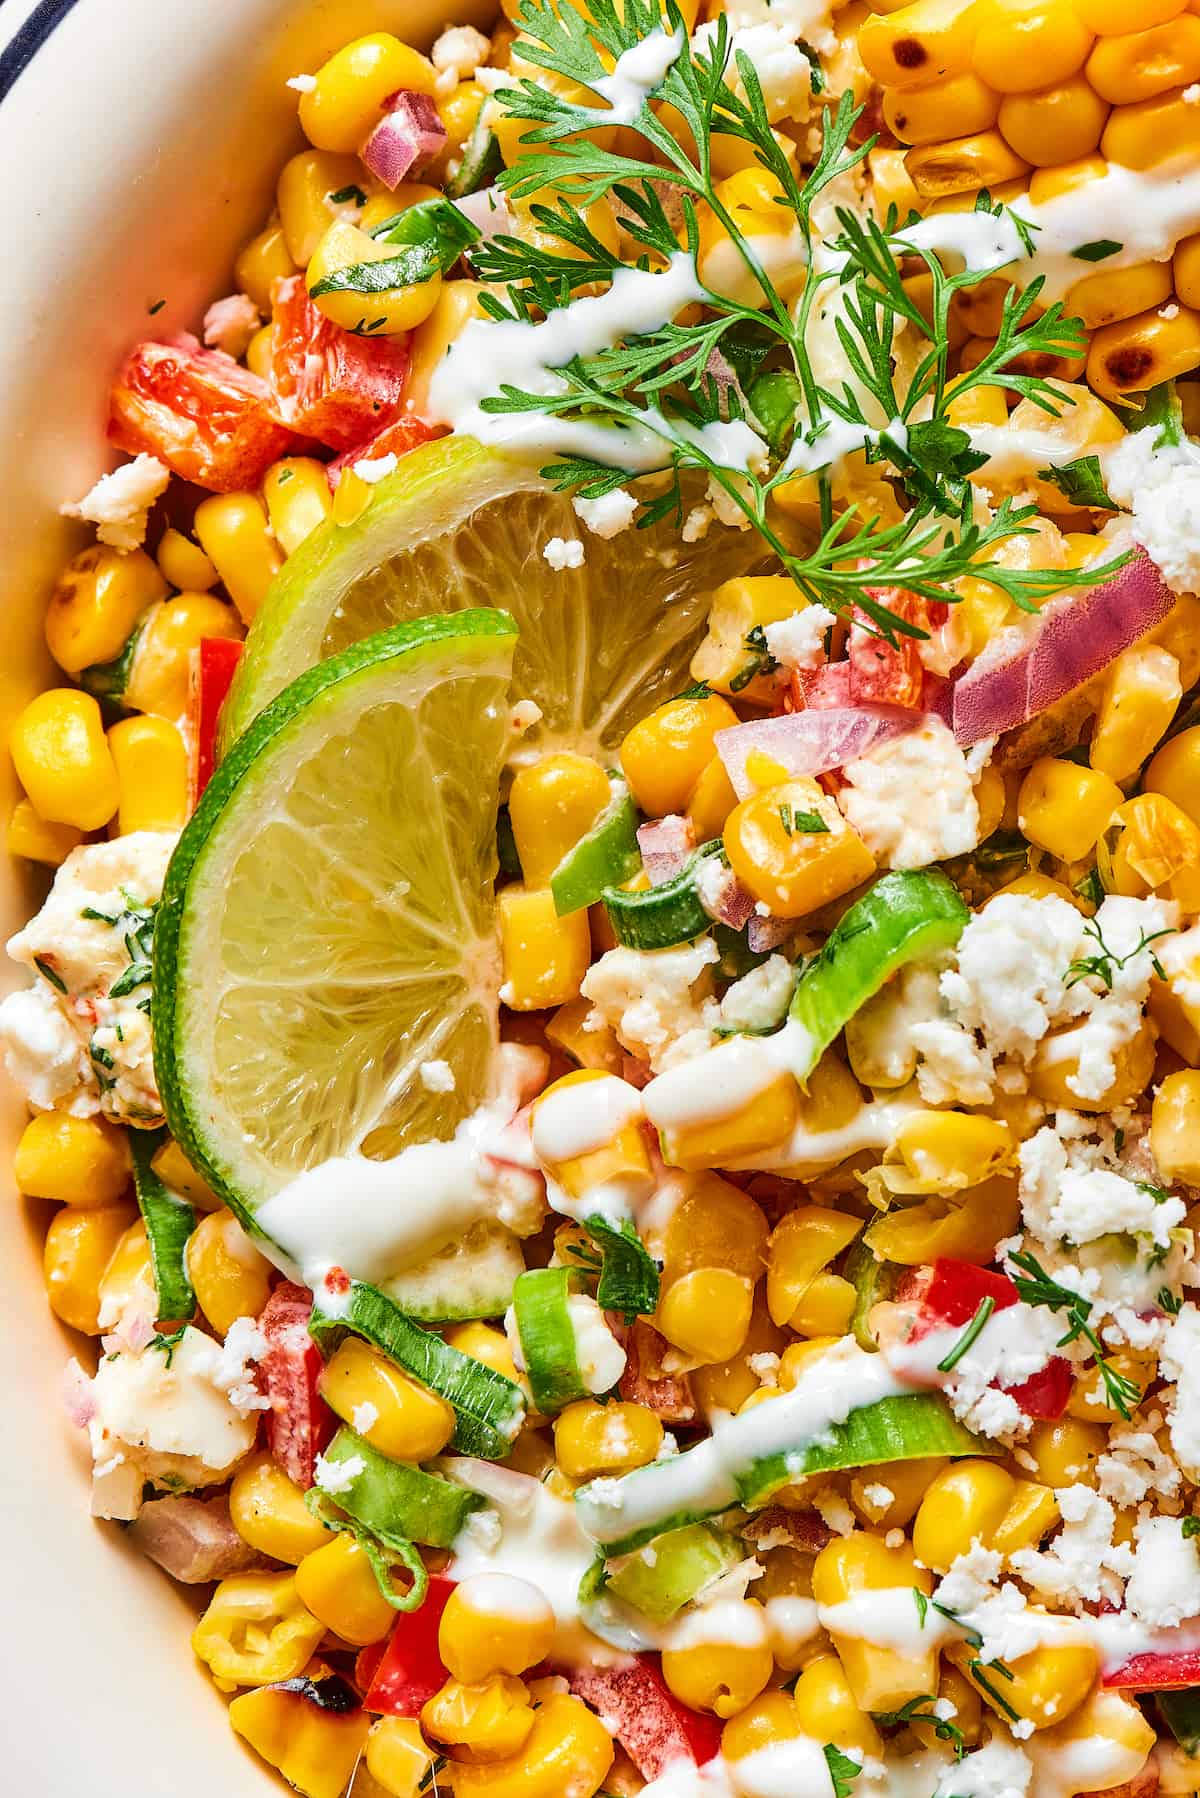 Close-up shot of Mexican street corn salad, showing the texture of the ingredients and the dressing.